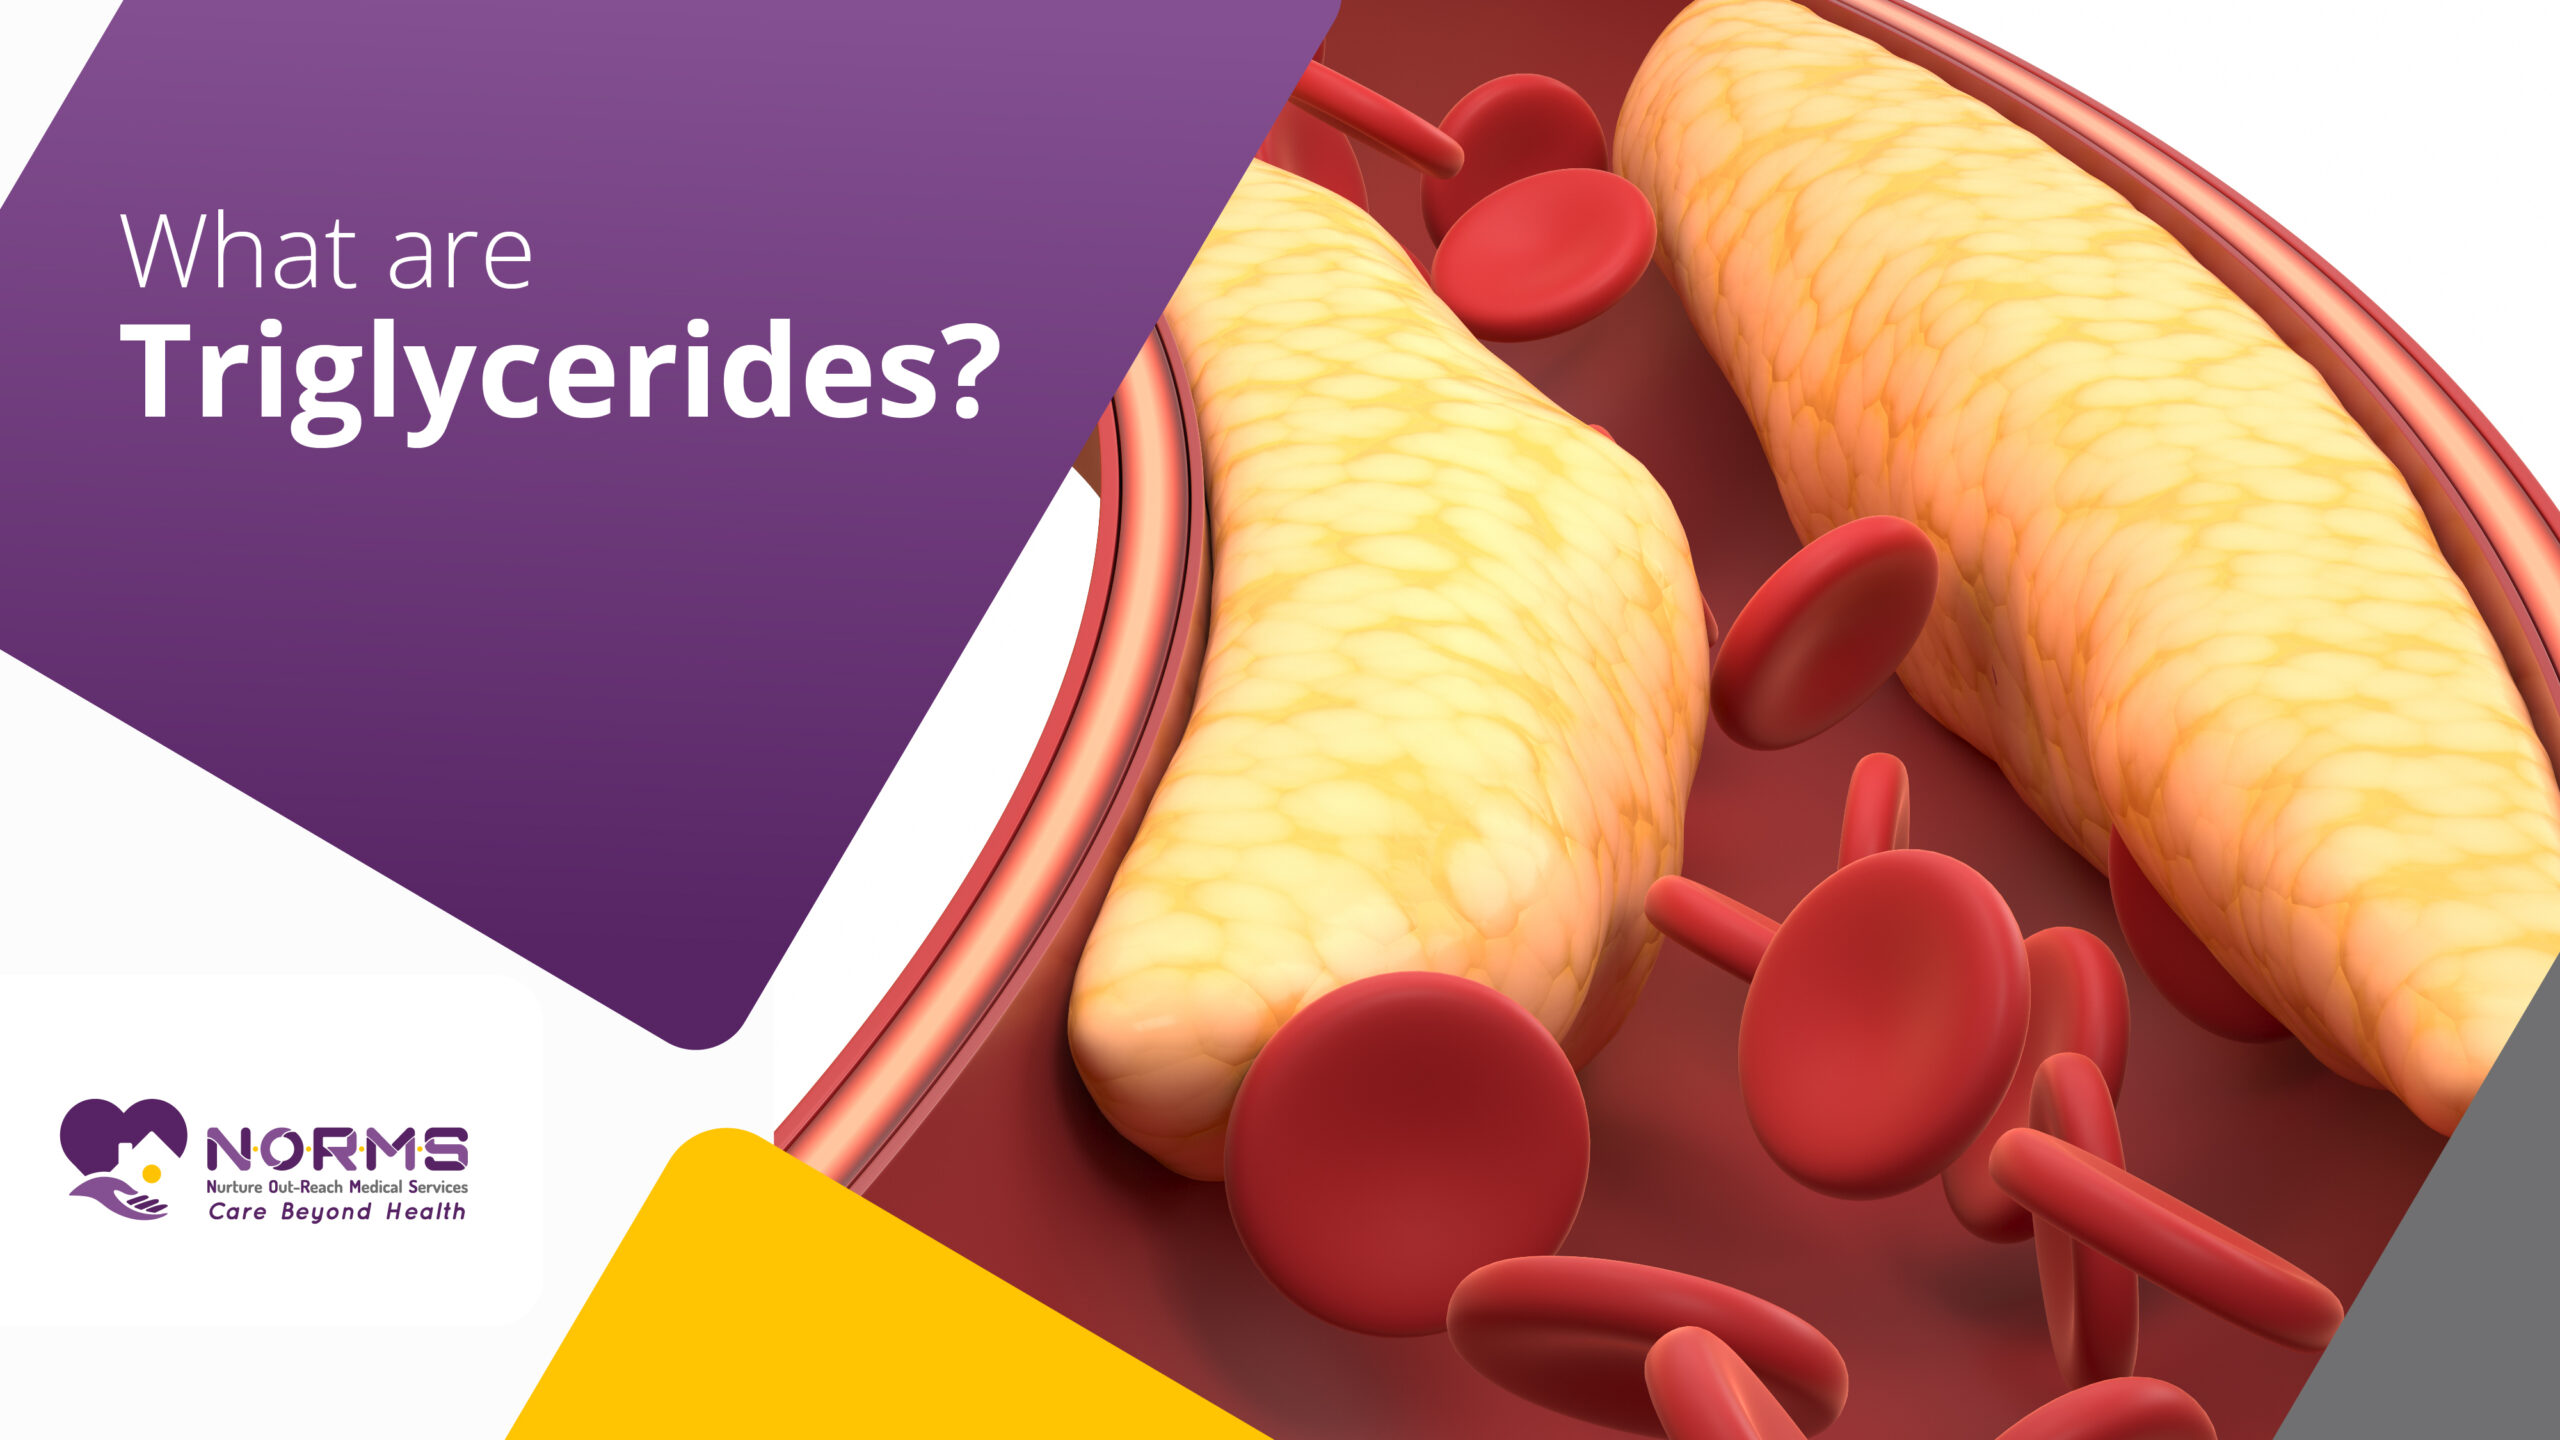 What are Triglycerides?